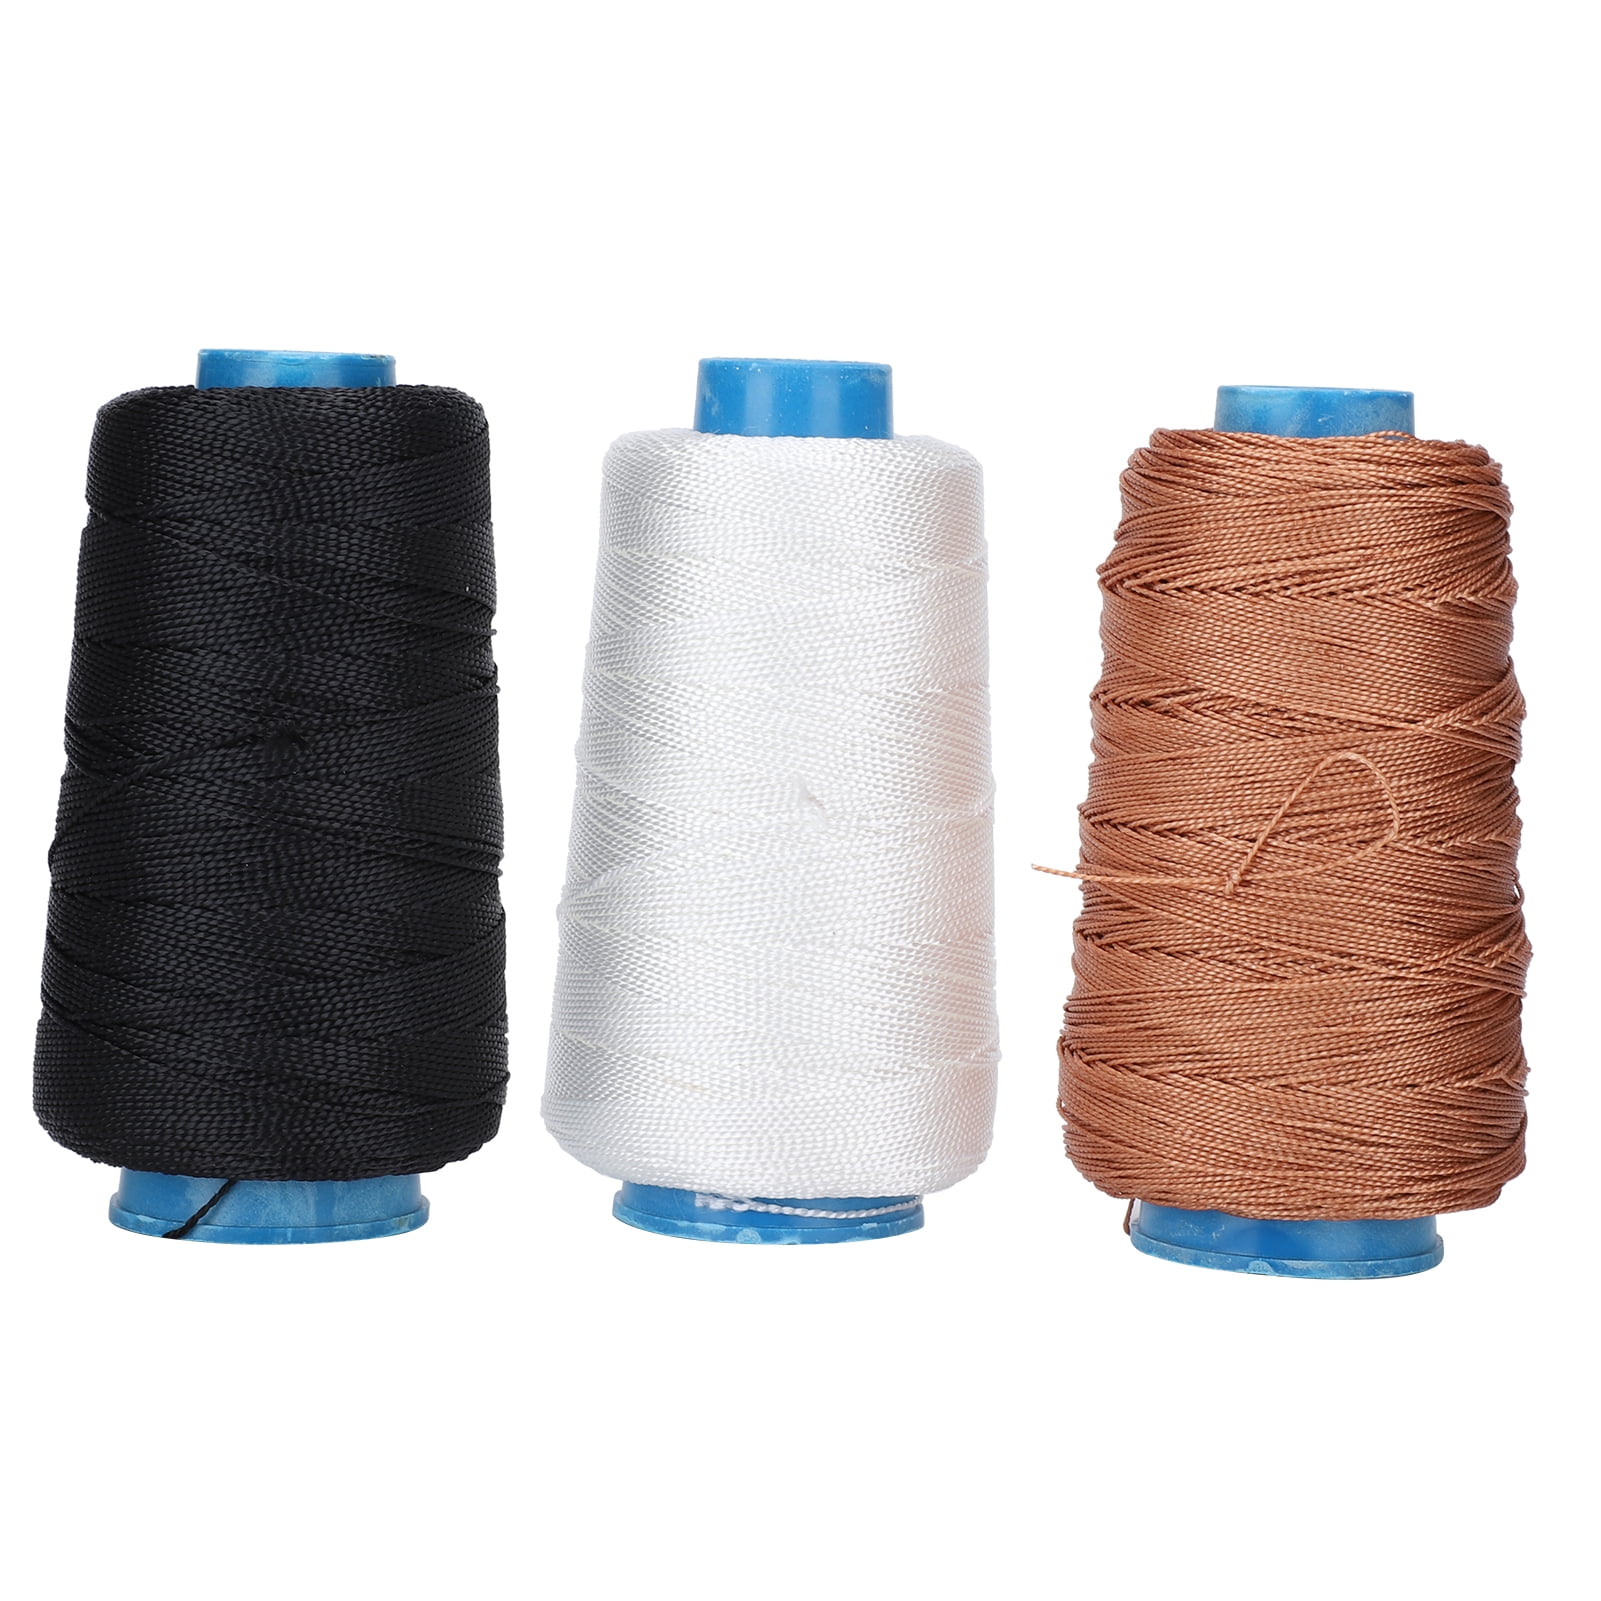 Mandala Crafts Bonded Nylon Thread for Sewing Leather, Upholstery, Jeans and Weaving Hair; Heavy-Duty (t270 #277 840d/3, White)